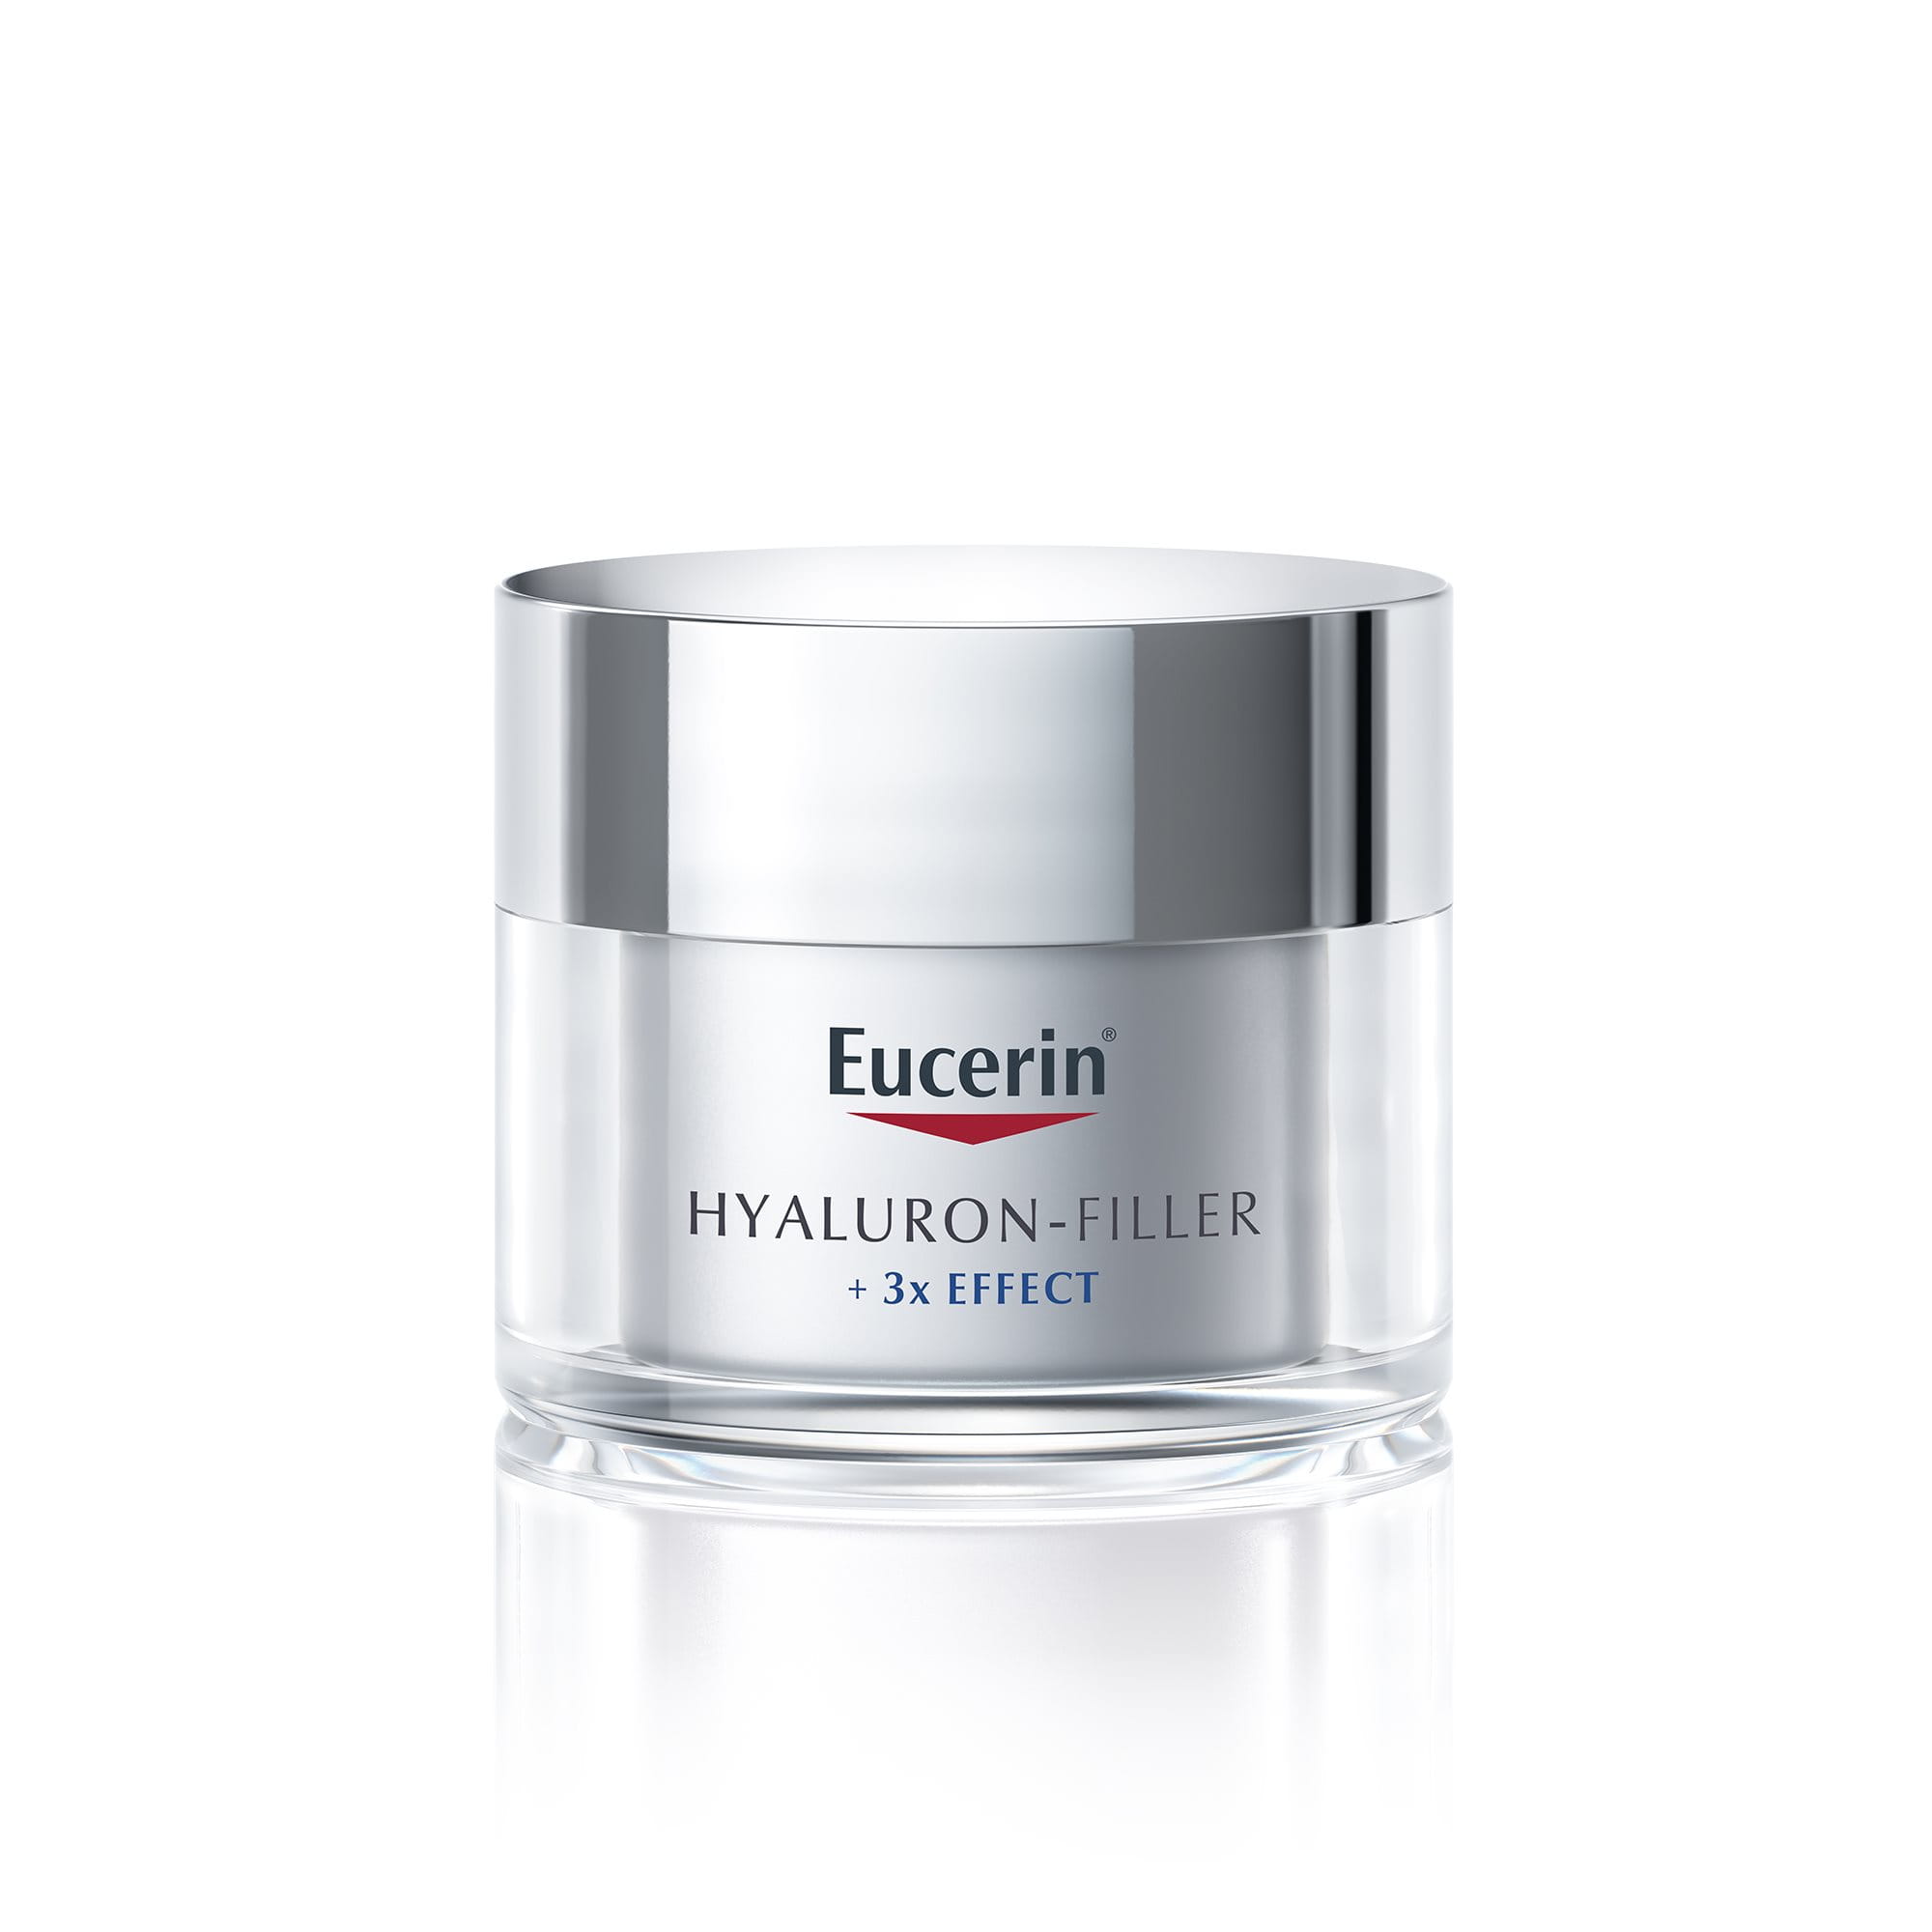 An anti-aging day face cream for all skin types with UV protection (SPF 30  and a UVA filter) and Hyaluronic Acid. Plumps up even the deepest wrinkles  for a rejuvenated look.